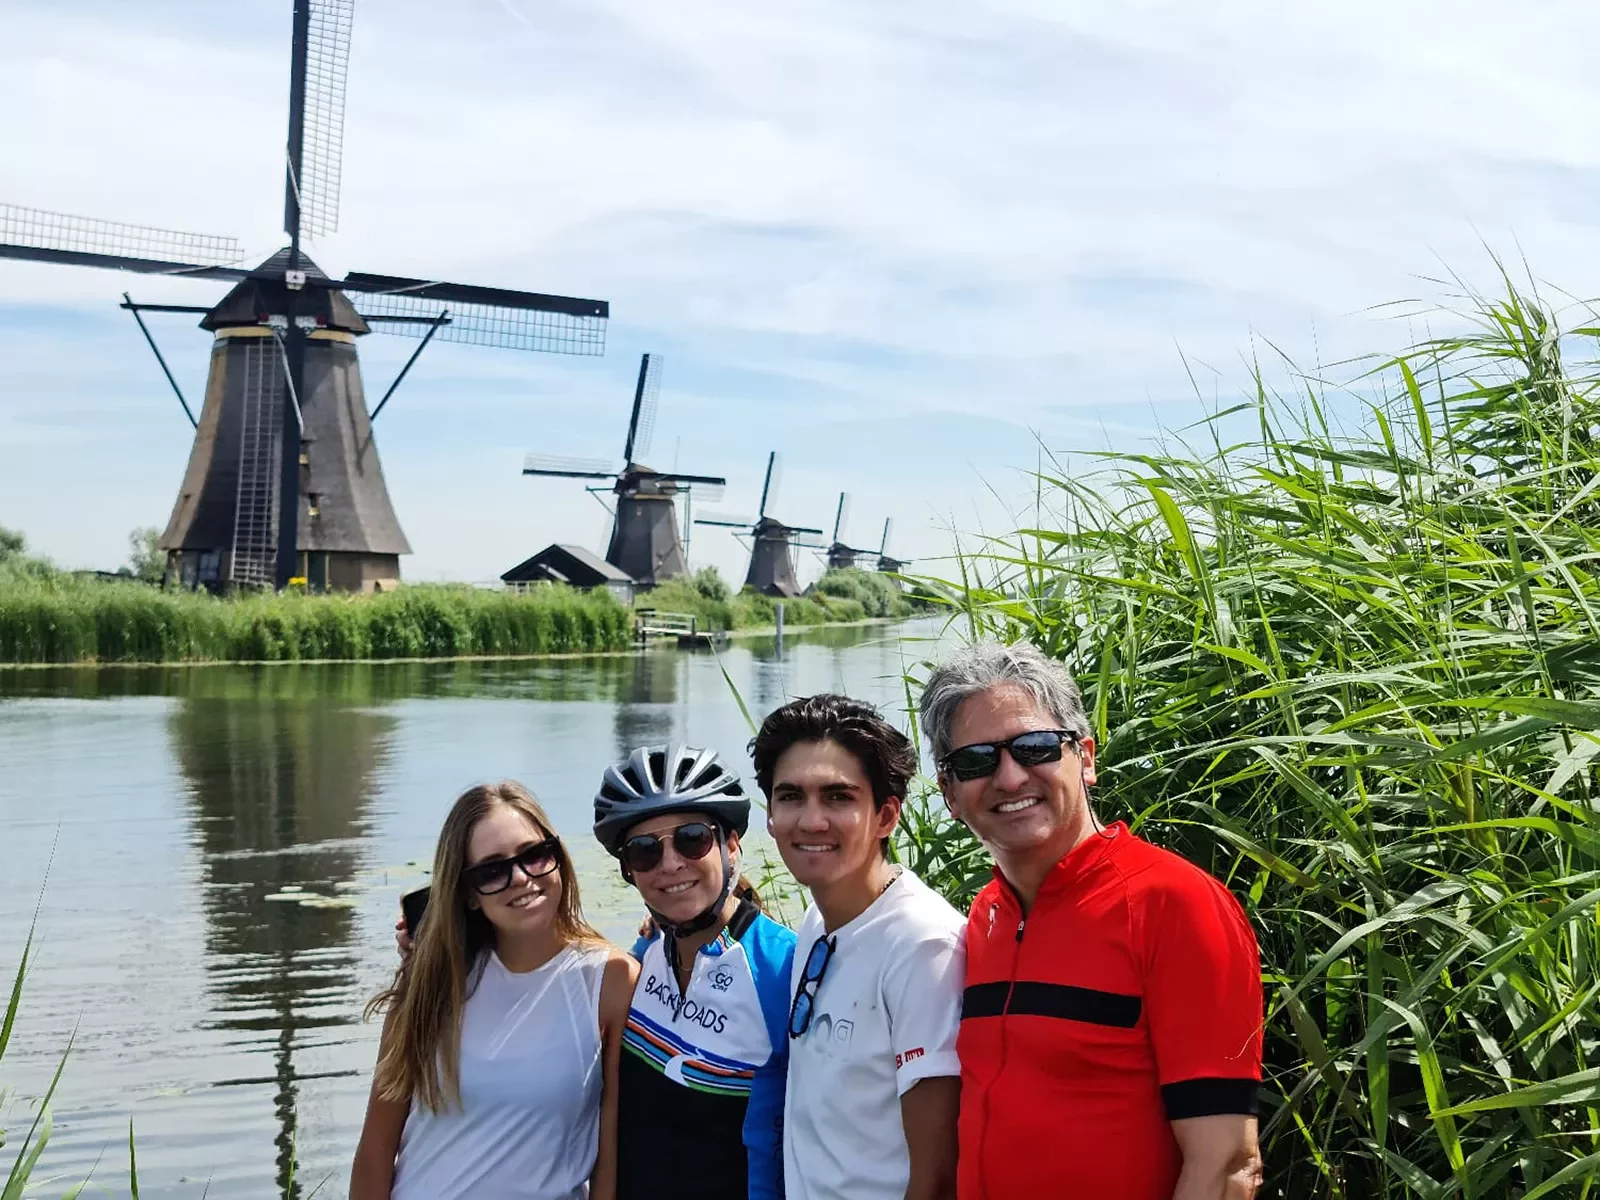 Family shot in front of windmills